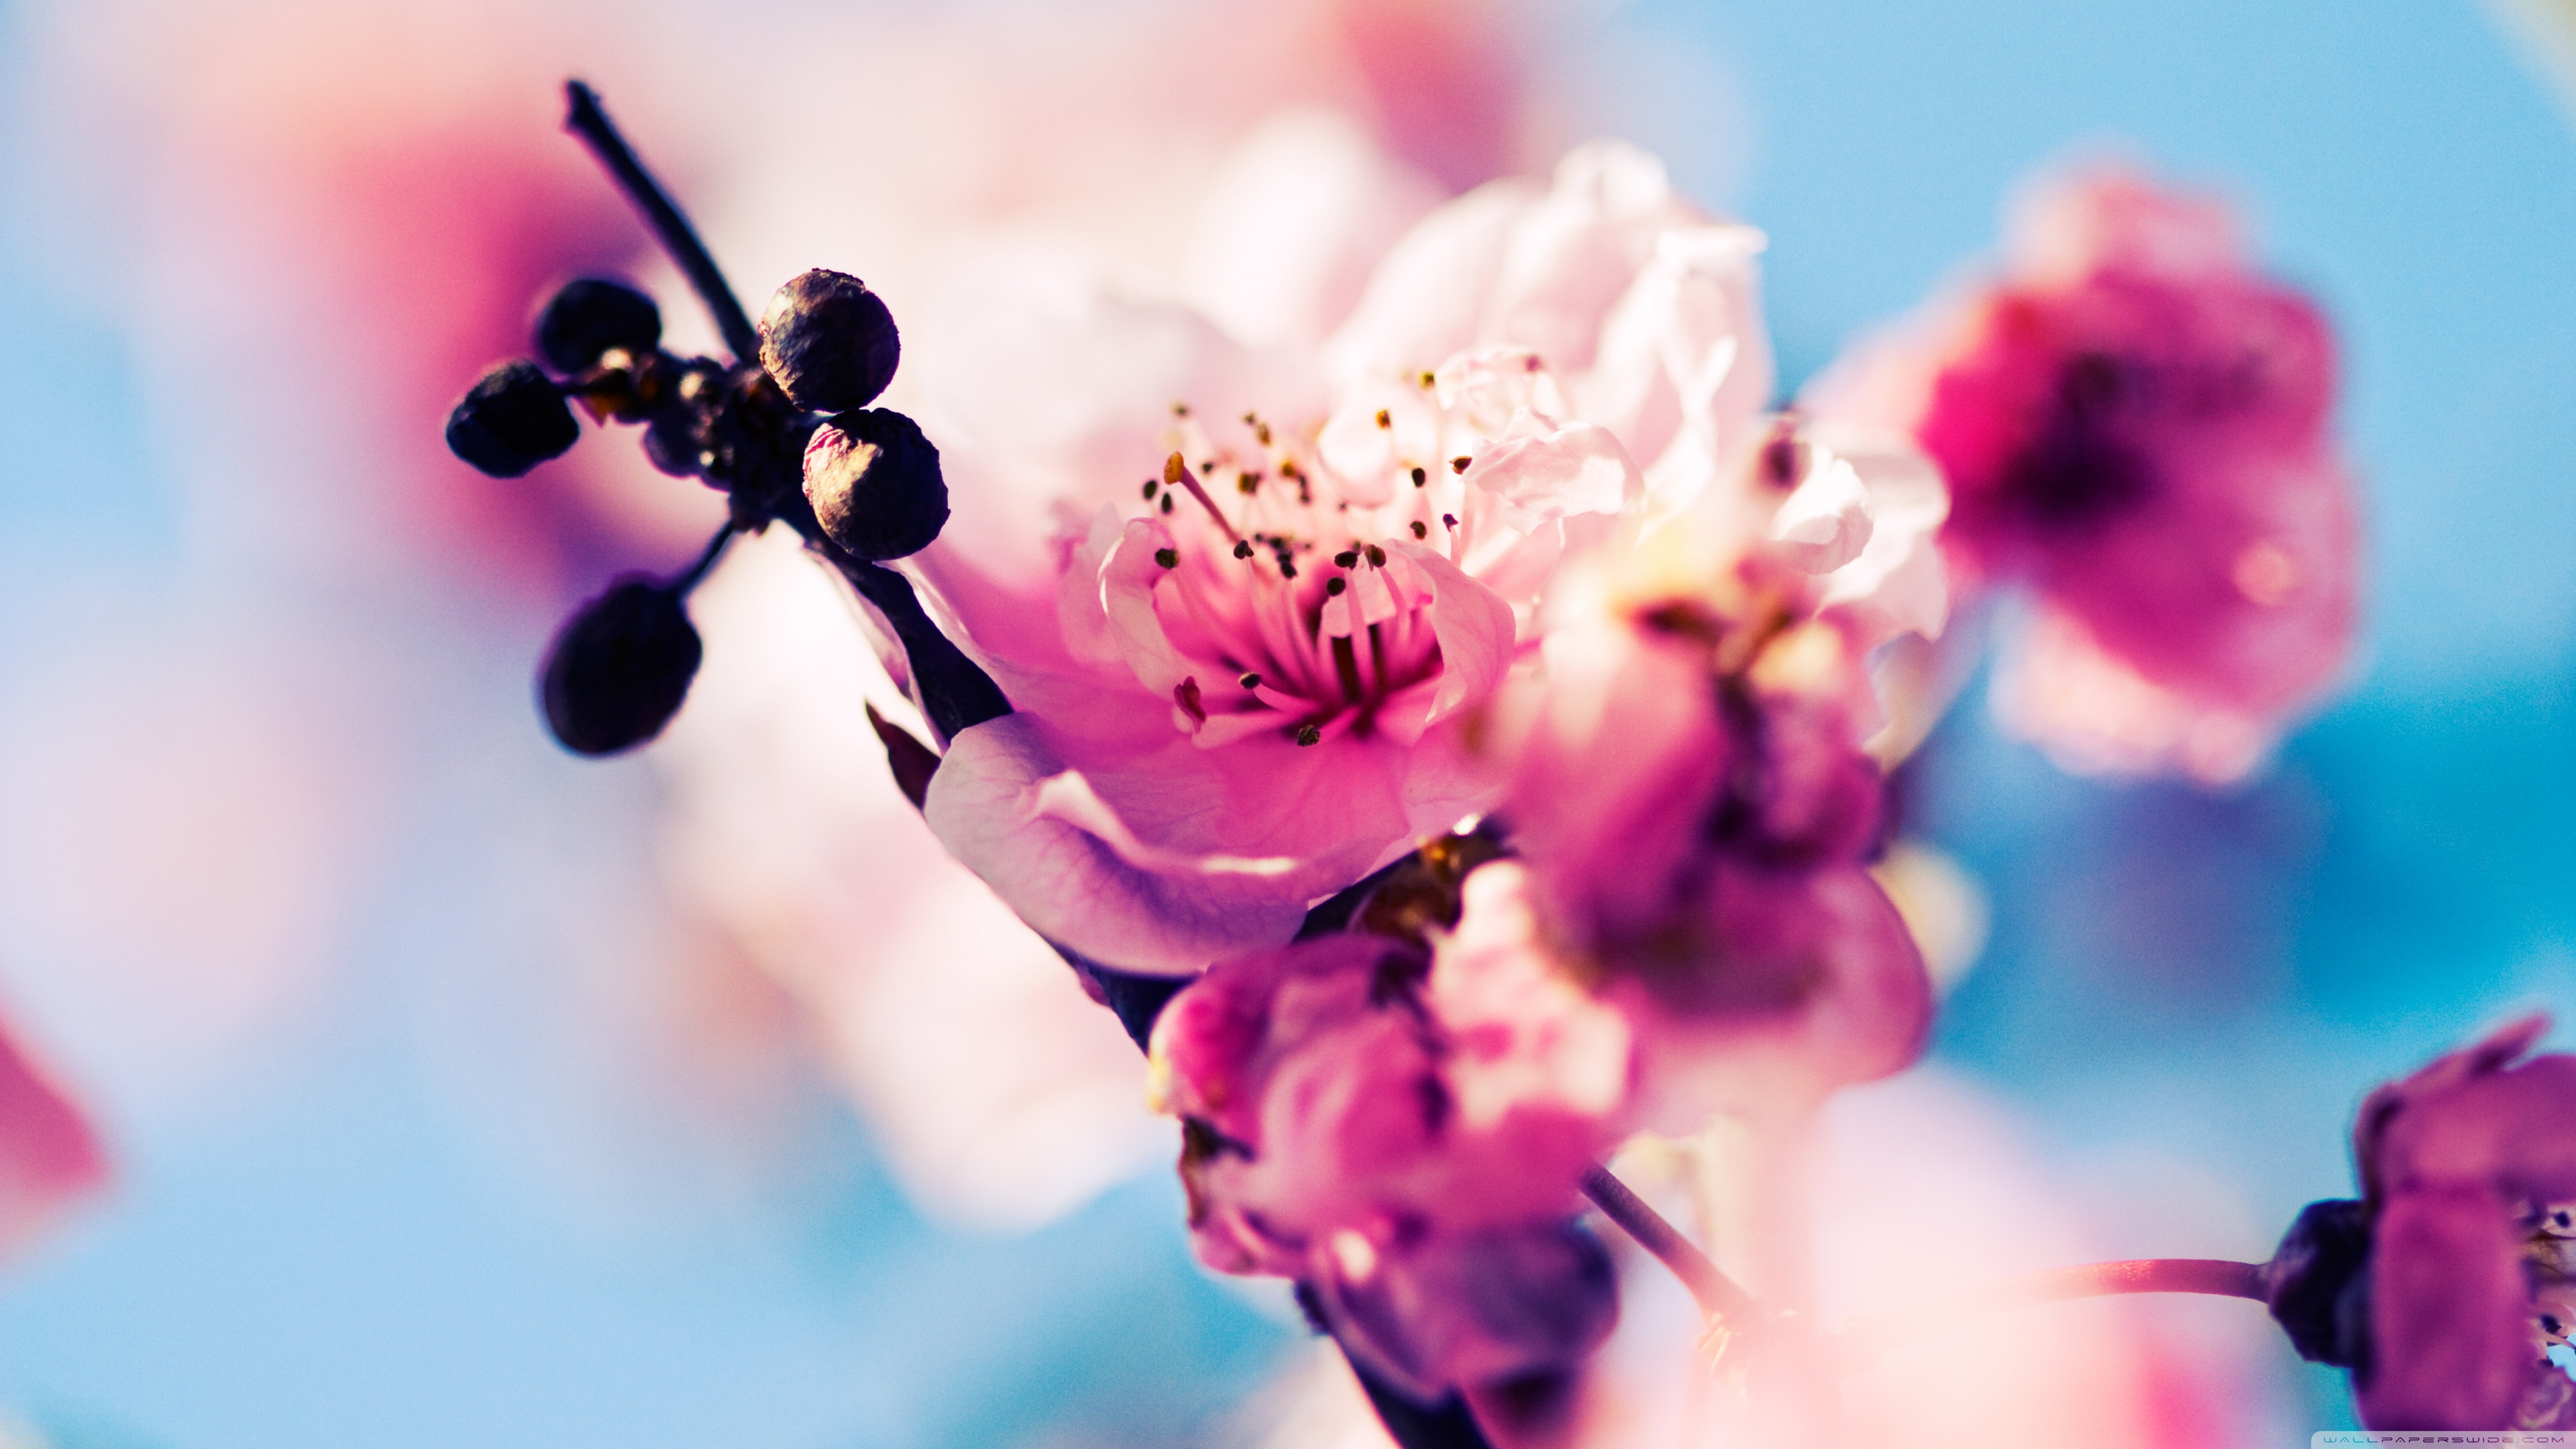 Early Spring Hd Wallpapers